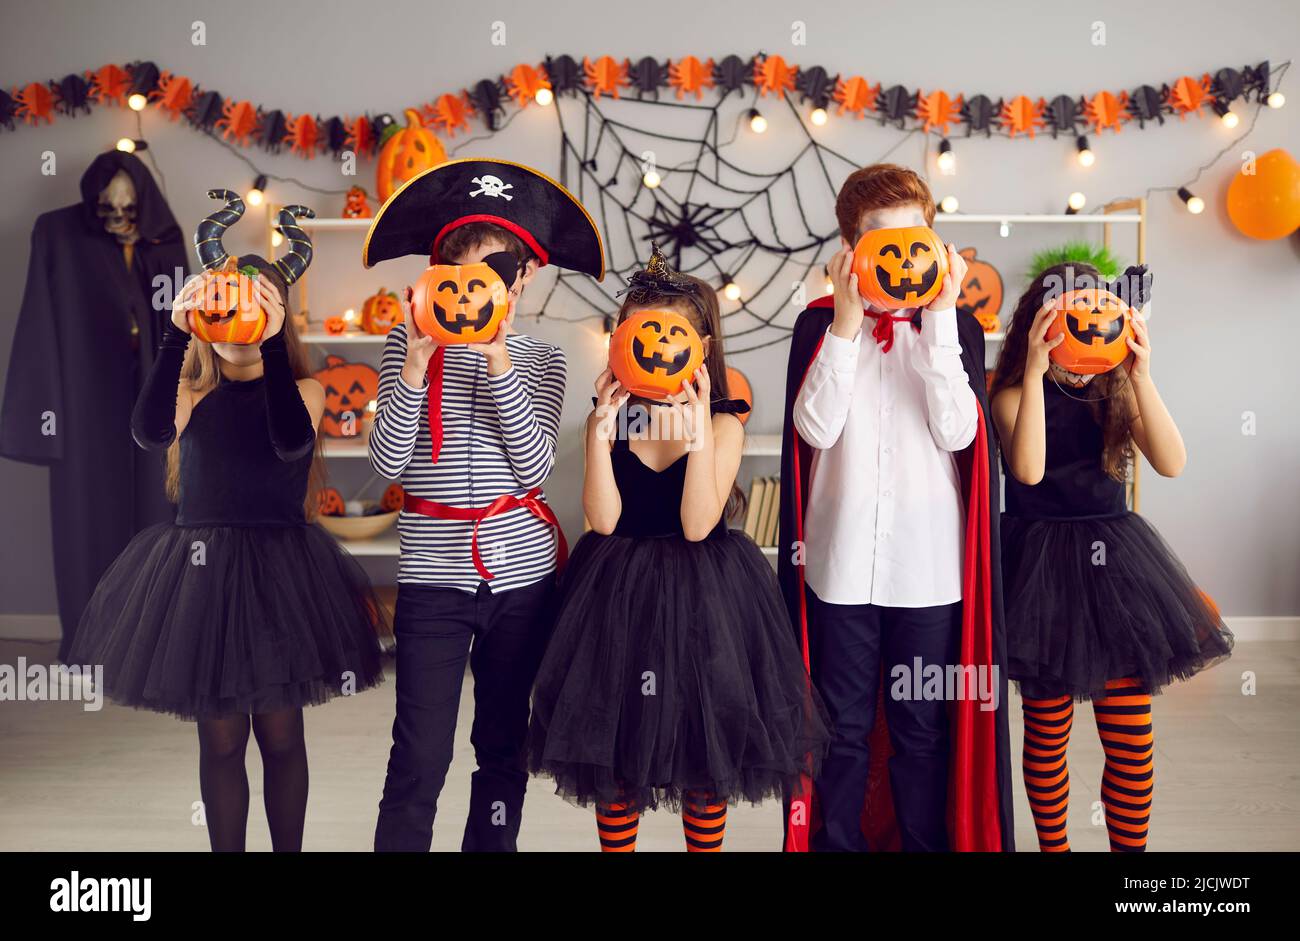 Children group in masquerade costumes pose with pumpkins Stock Photo